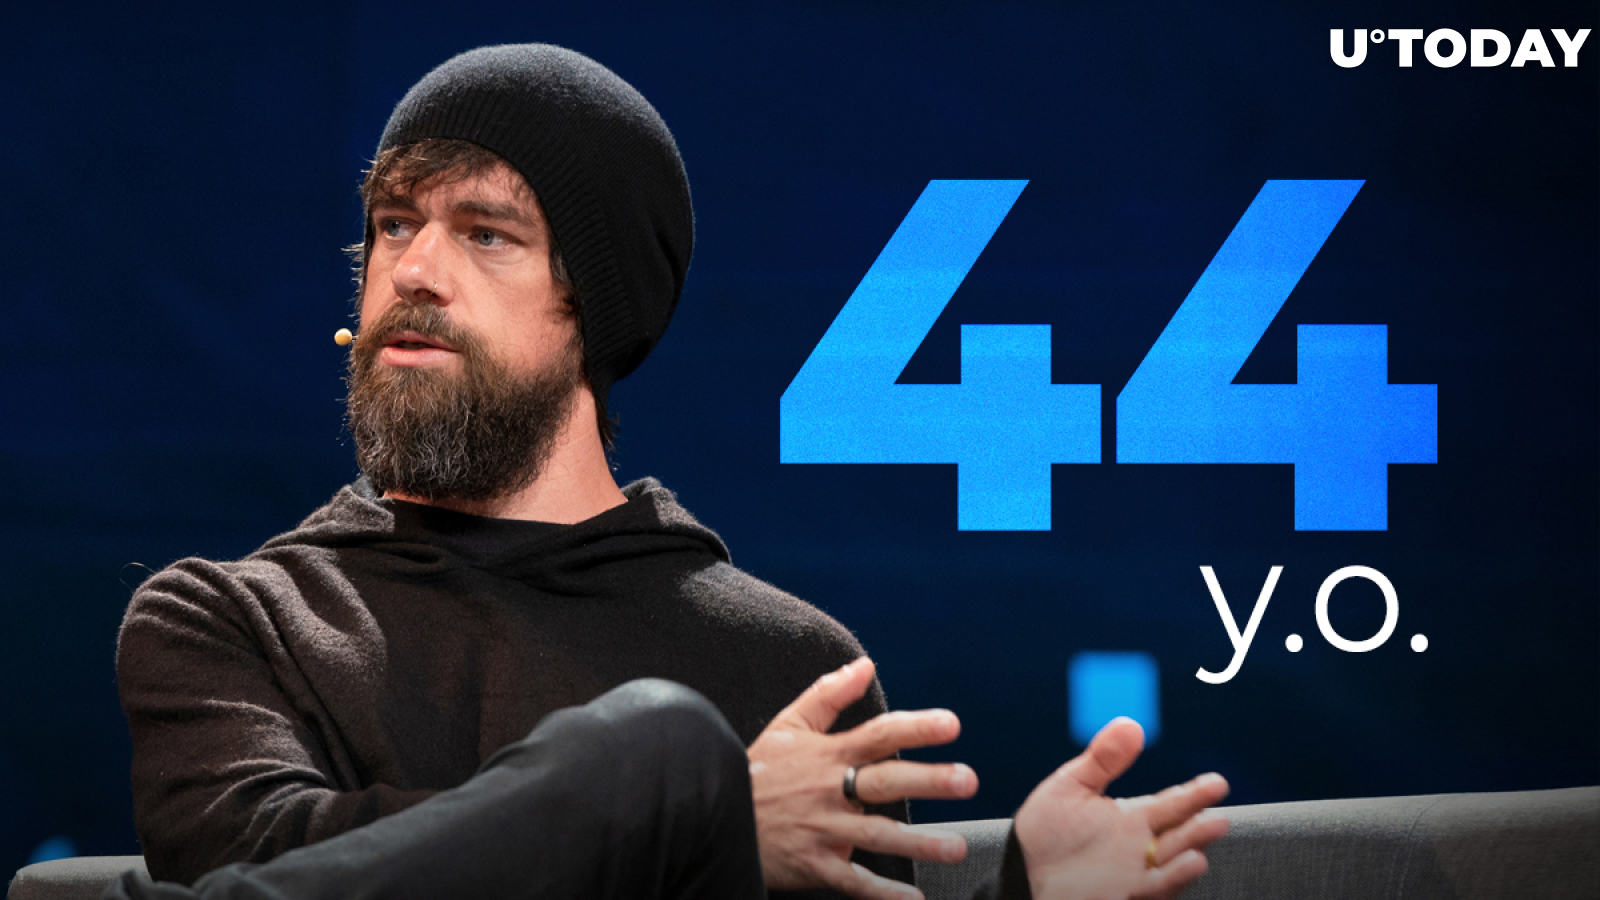 Influential BTC Supporter Jack Dorsey Turns 44: Bitcoin, Ice Baths and Meditation Keep Him Up